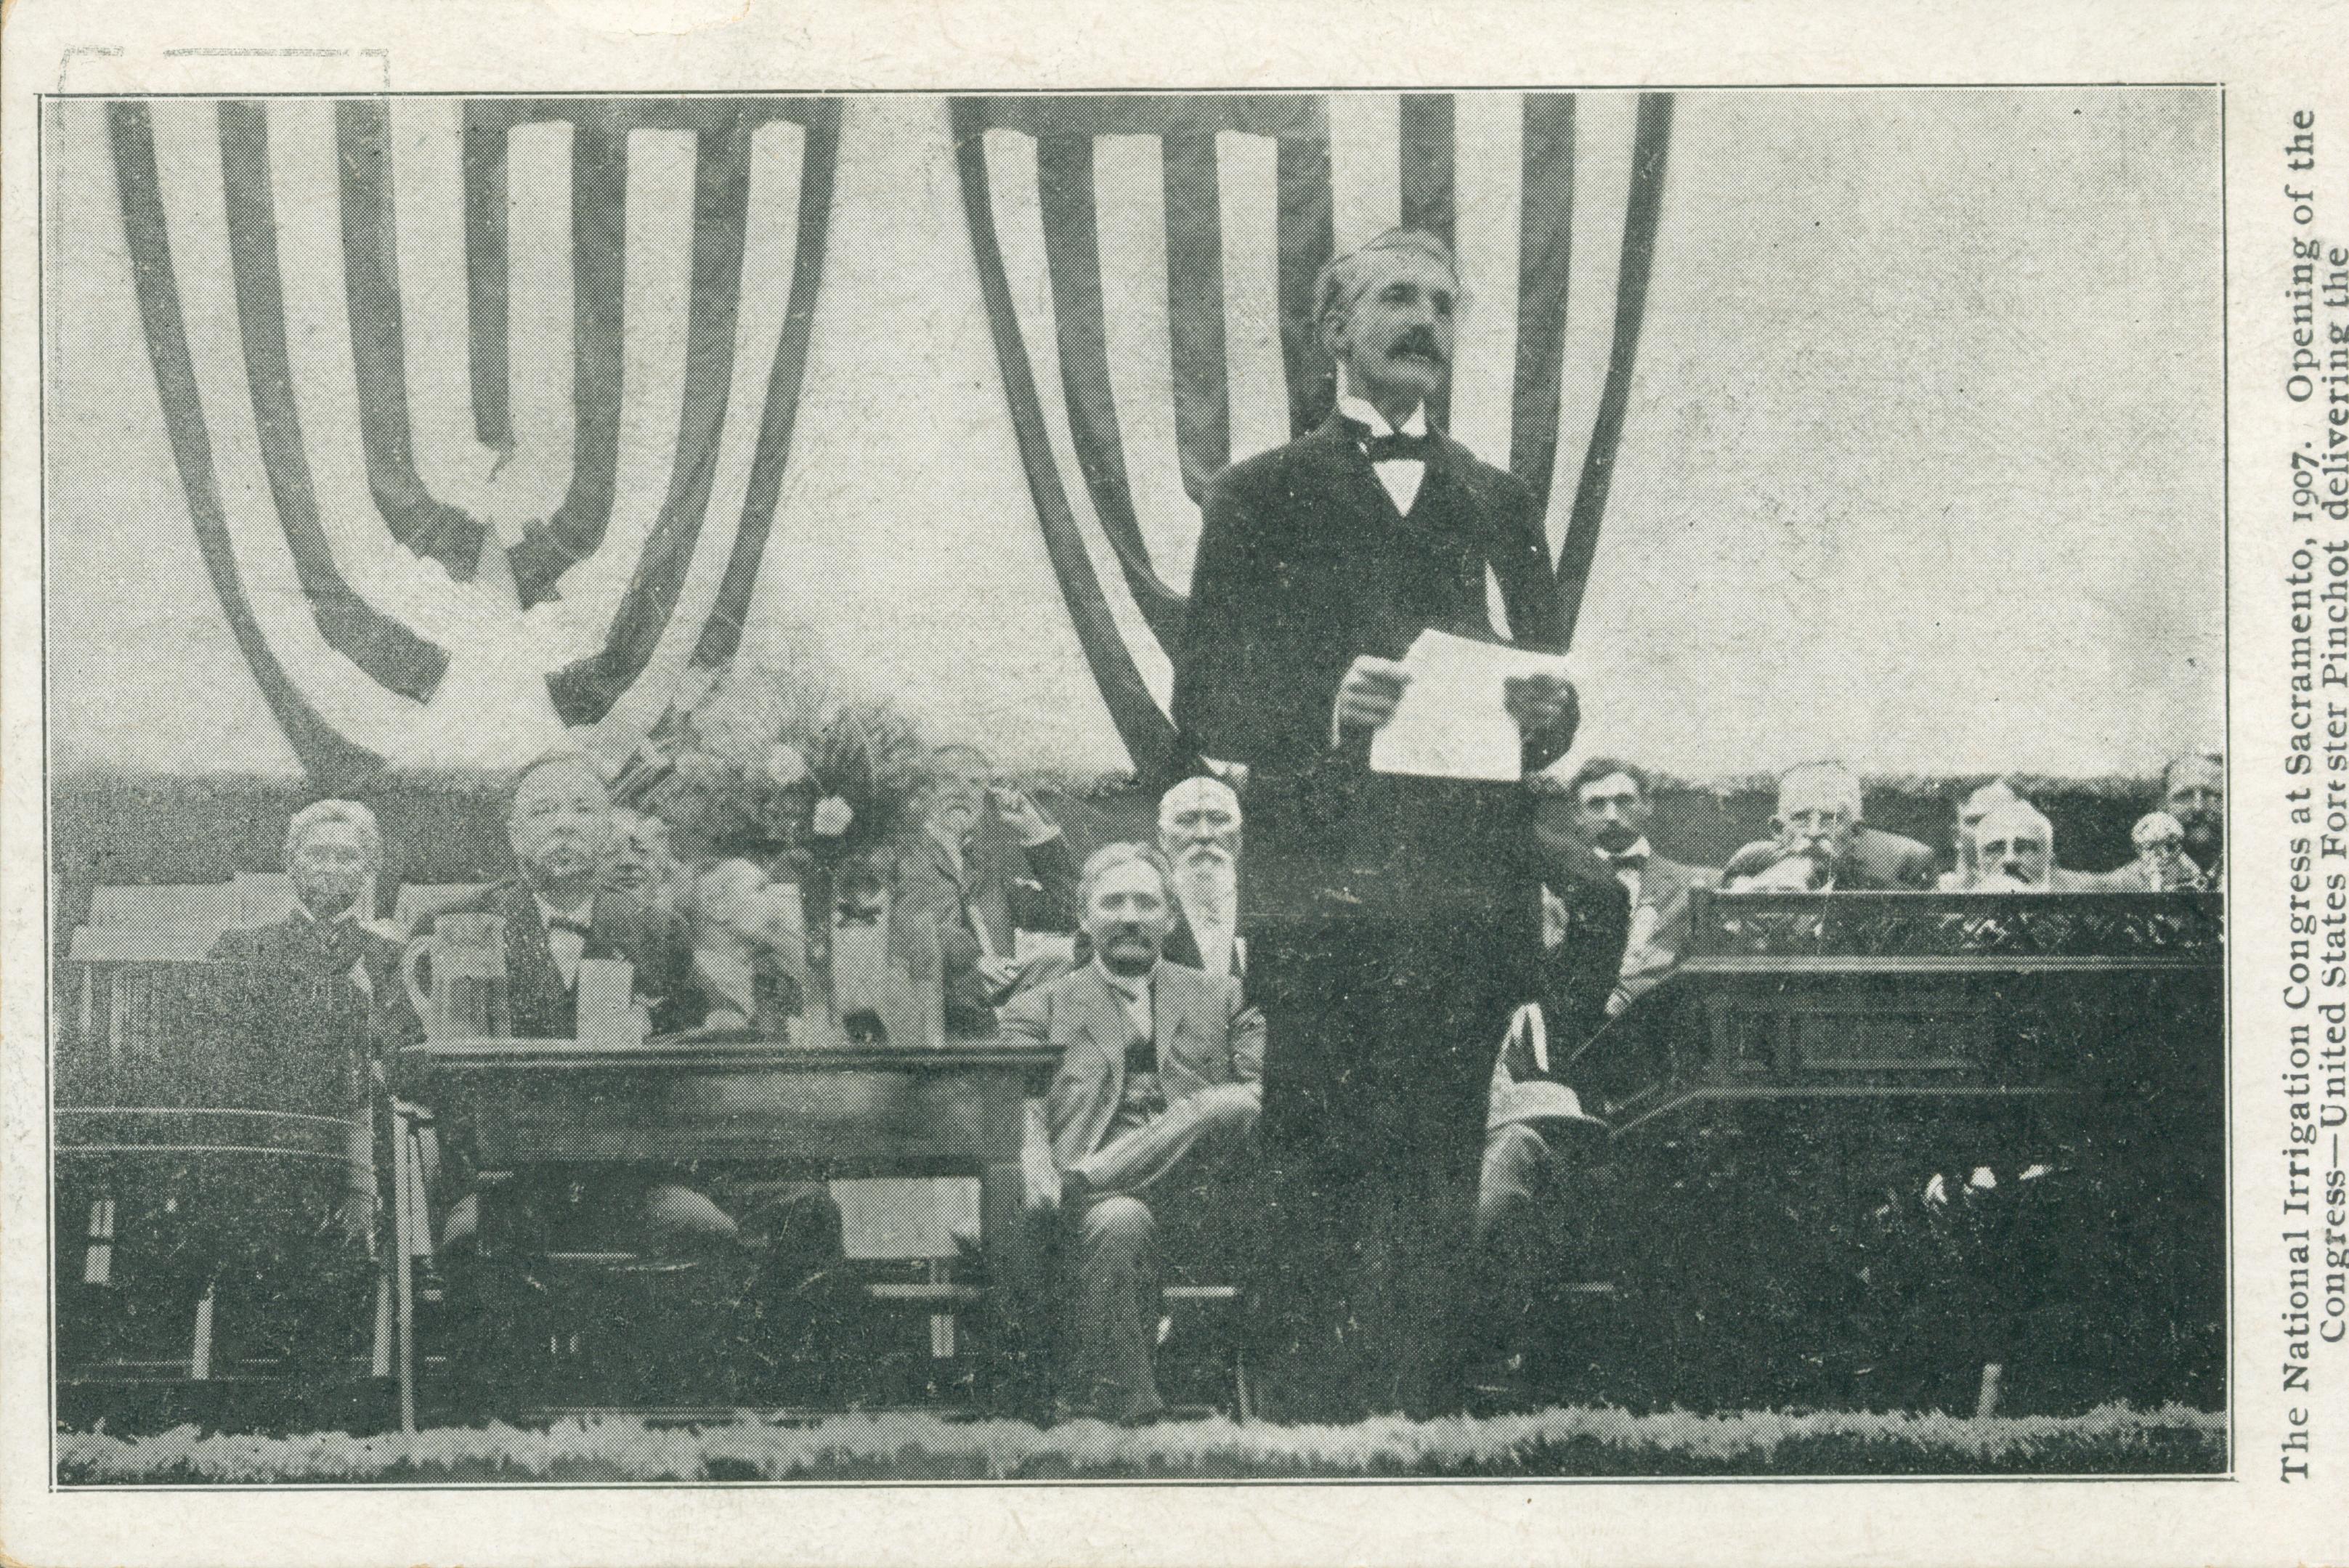 This postcard shows a Mr. Pinchot giving a speech with his back to several men seated at desks.